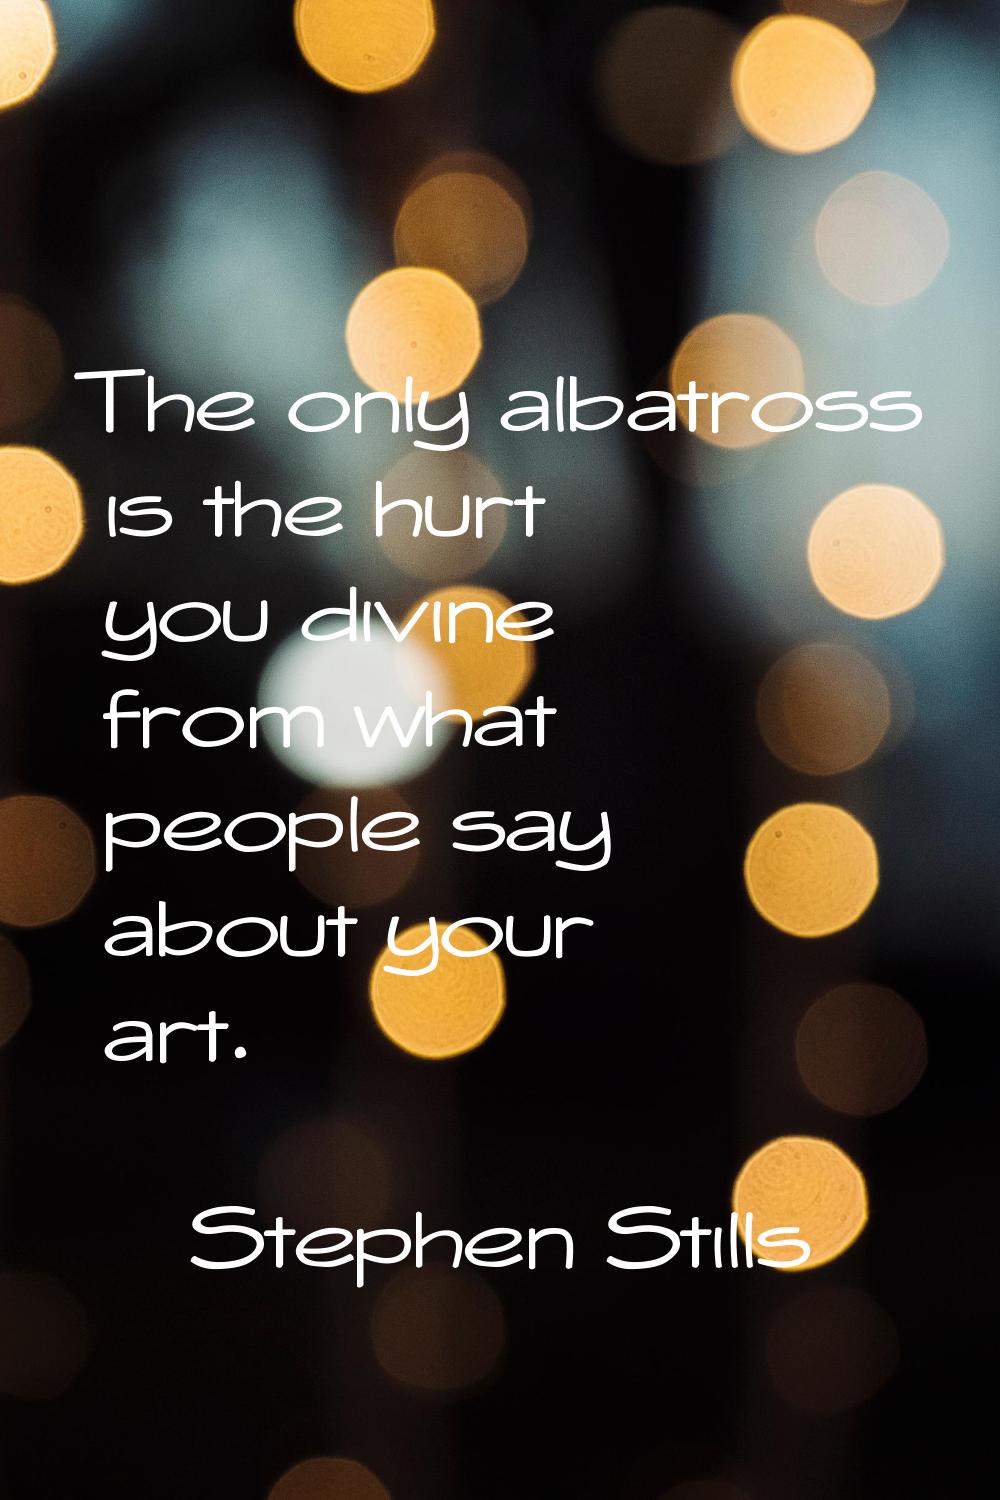 The only albatross is the hurt you divine from what people say about your art.